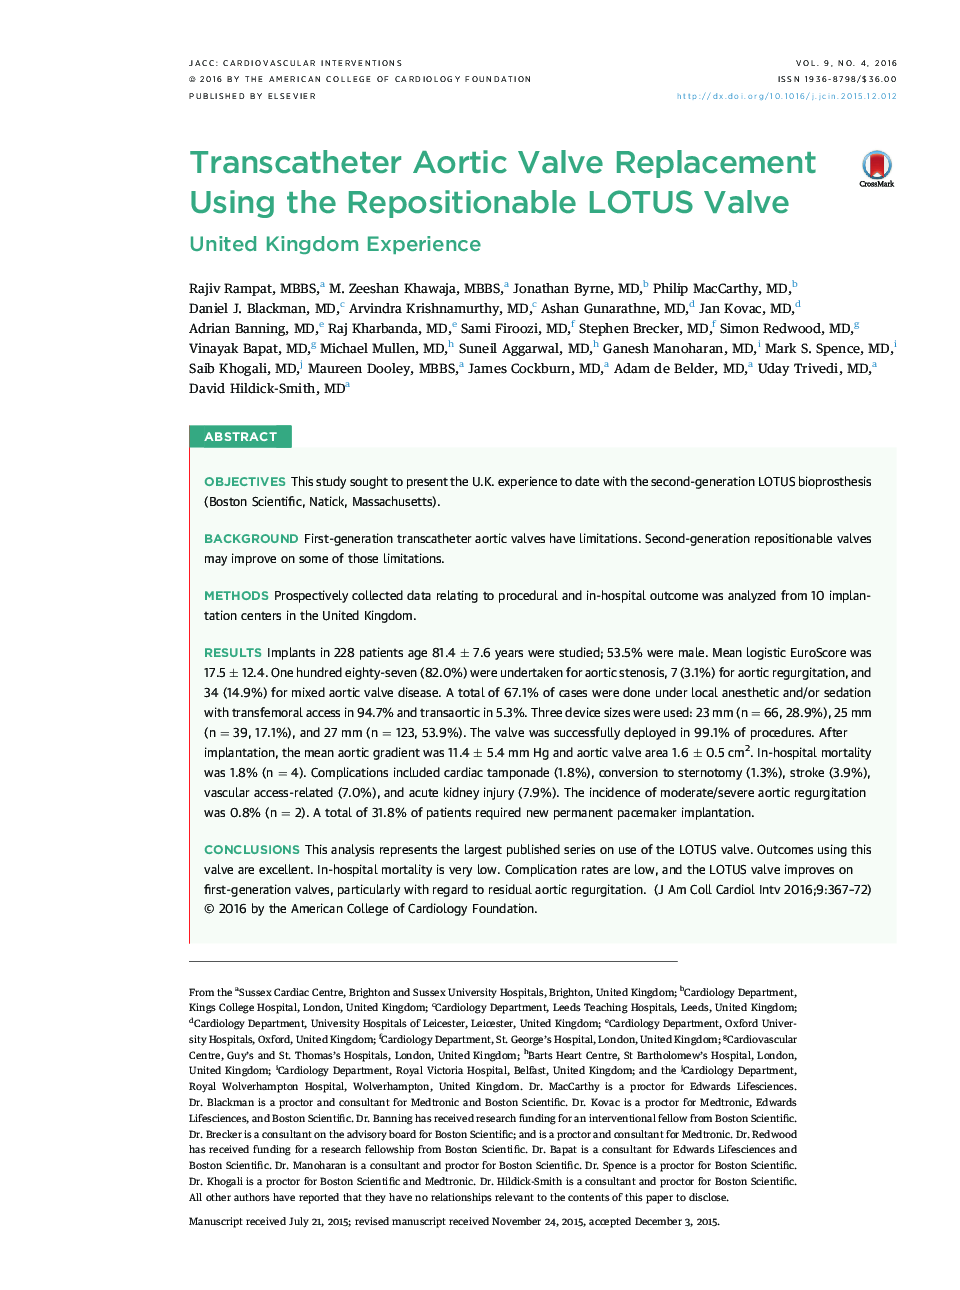 Transcatheter Aortic Valve Replacement Using the Repositionable LOTUS Valve: United Kingdom Experience